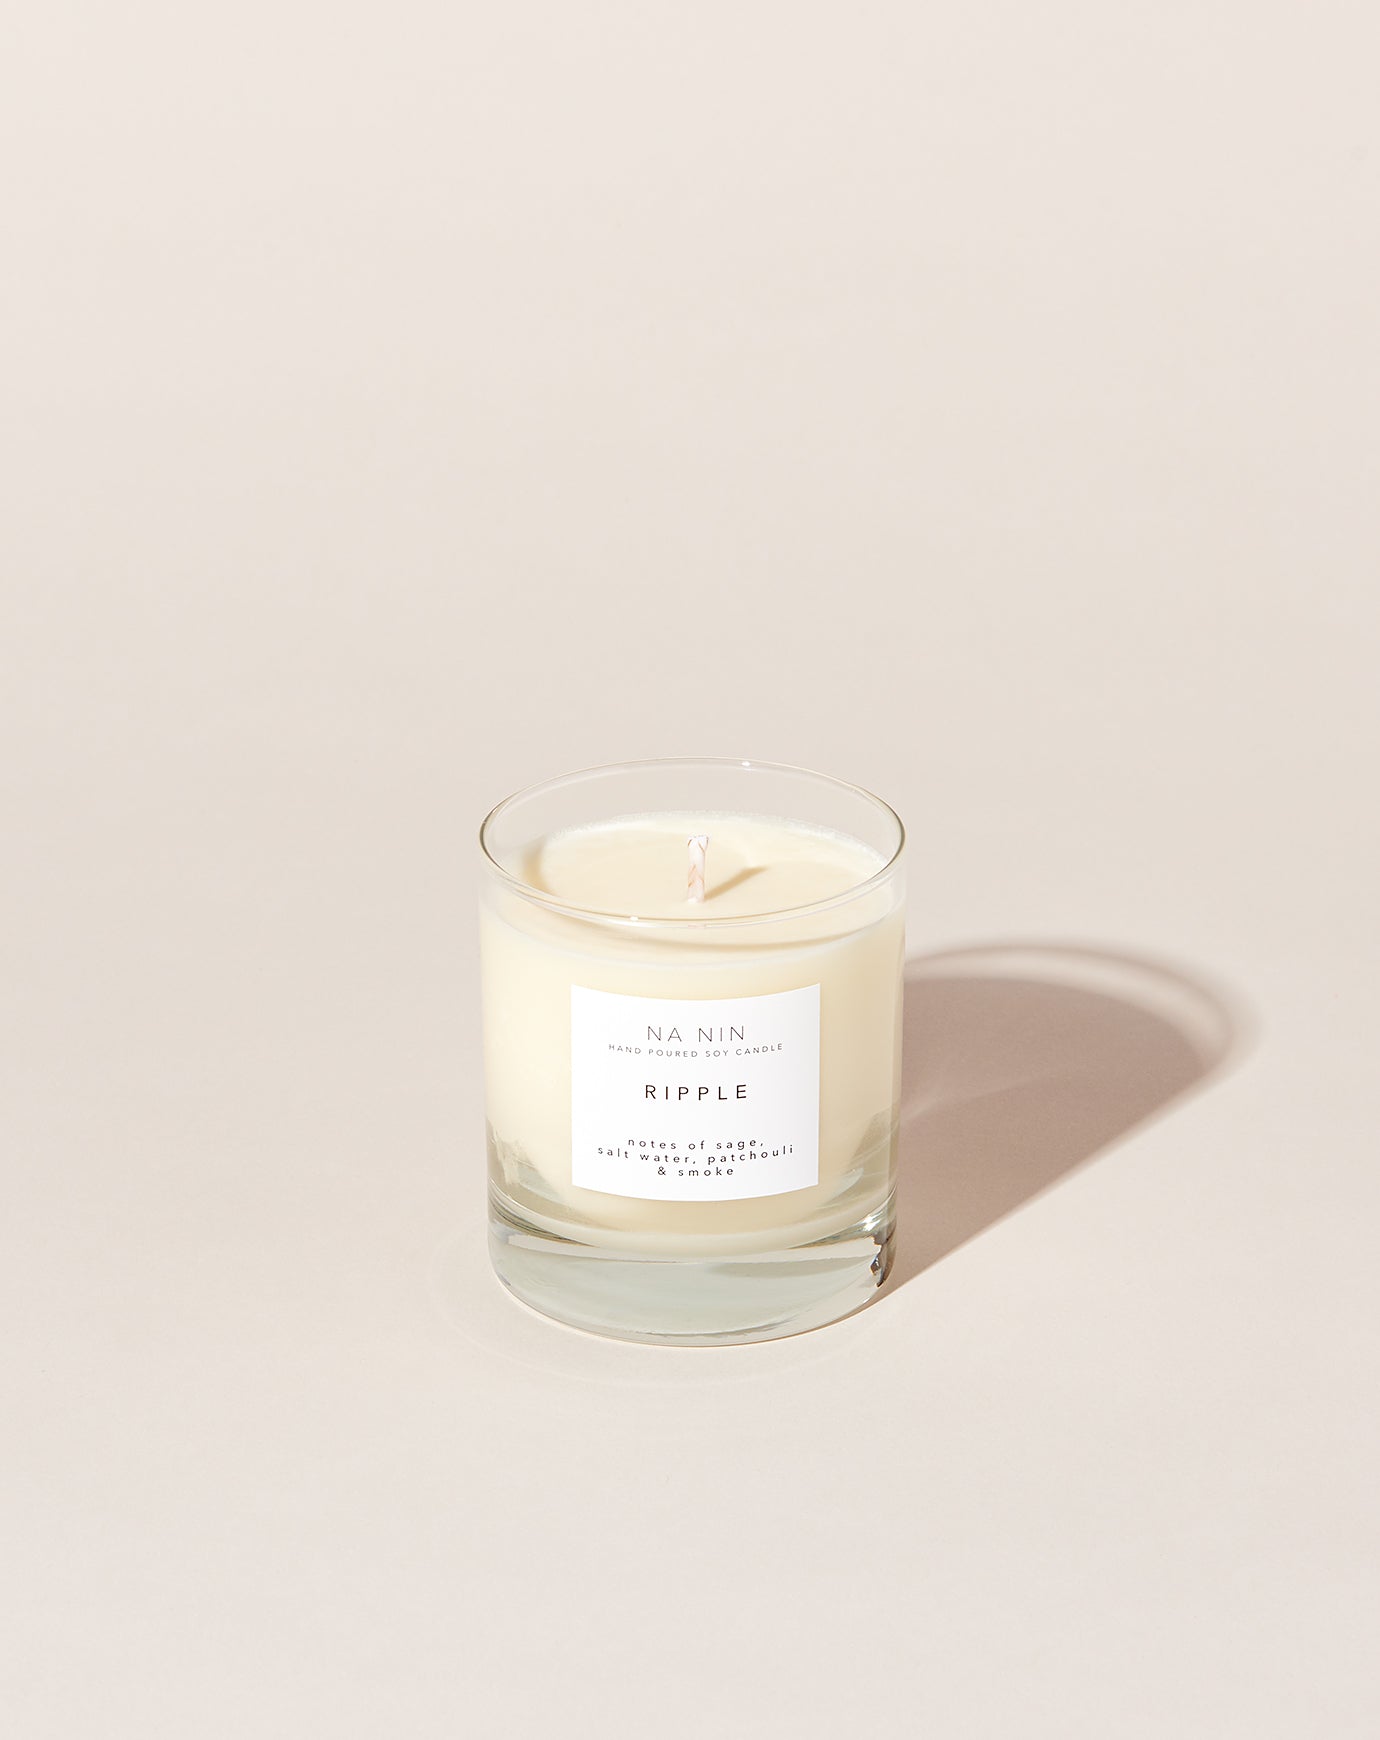 Na Nin Signature Collection: Ripple Candle